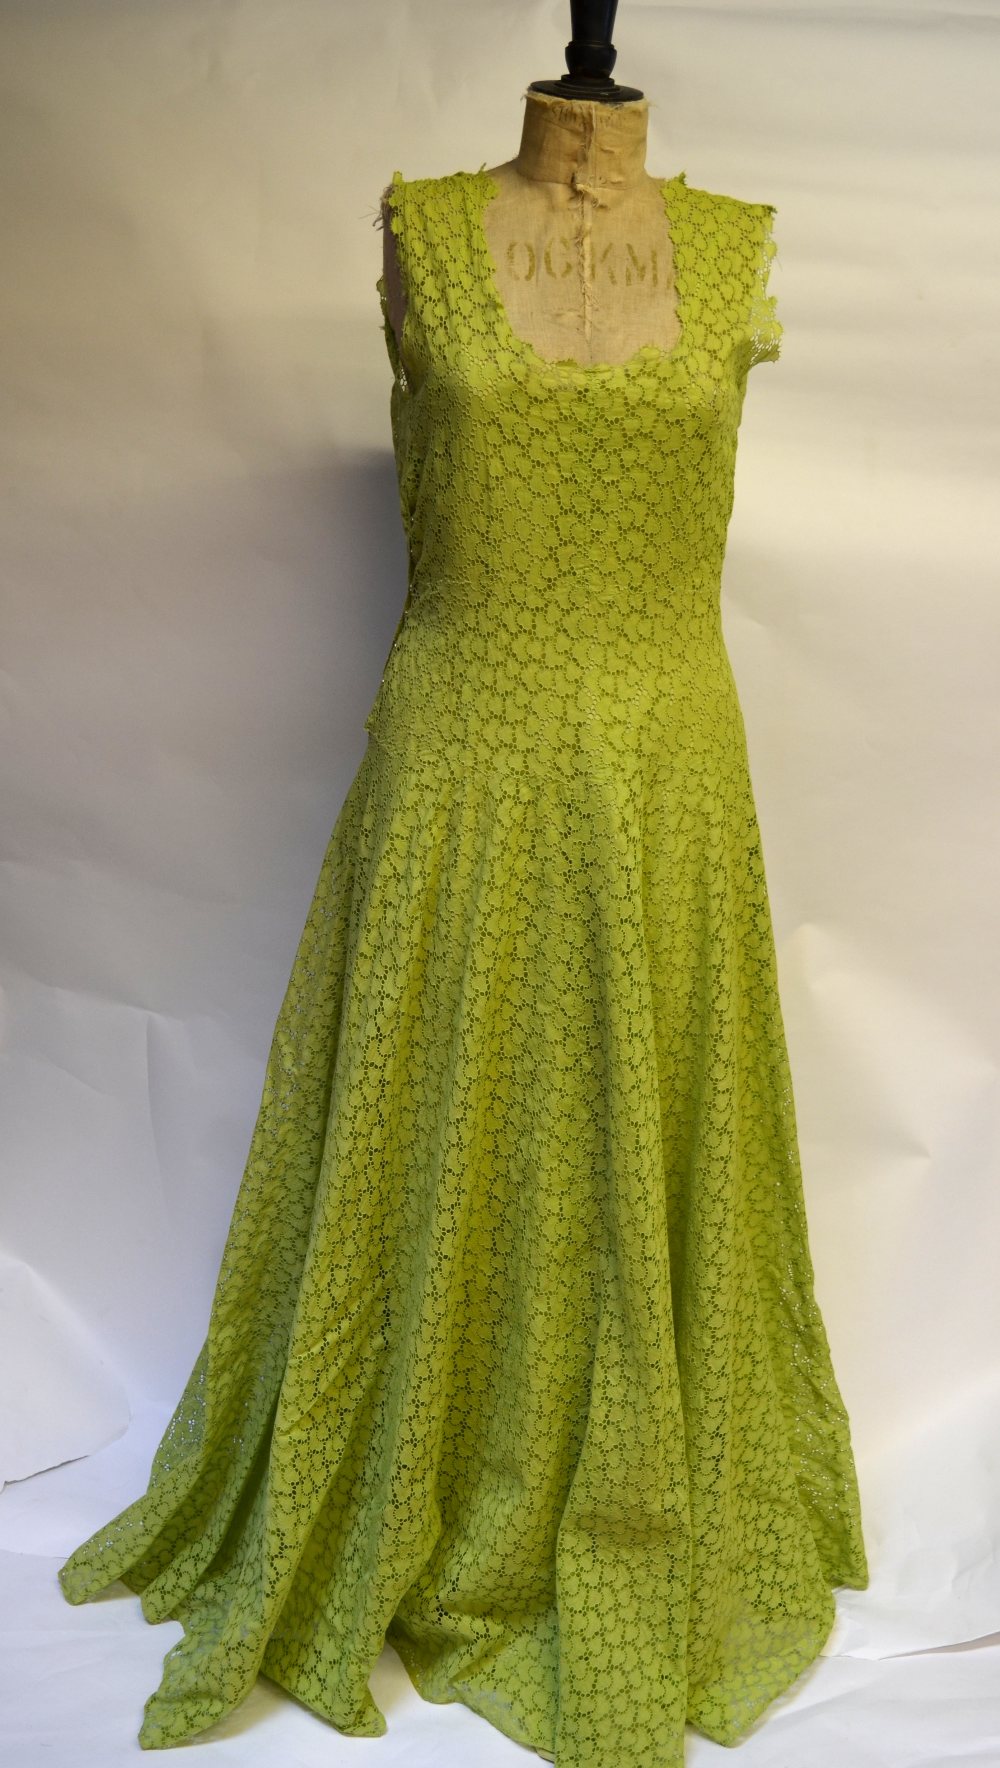 A 1940s lime green cotton embroidery angliase full-length dress with satin underslip, 45 cm across